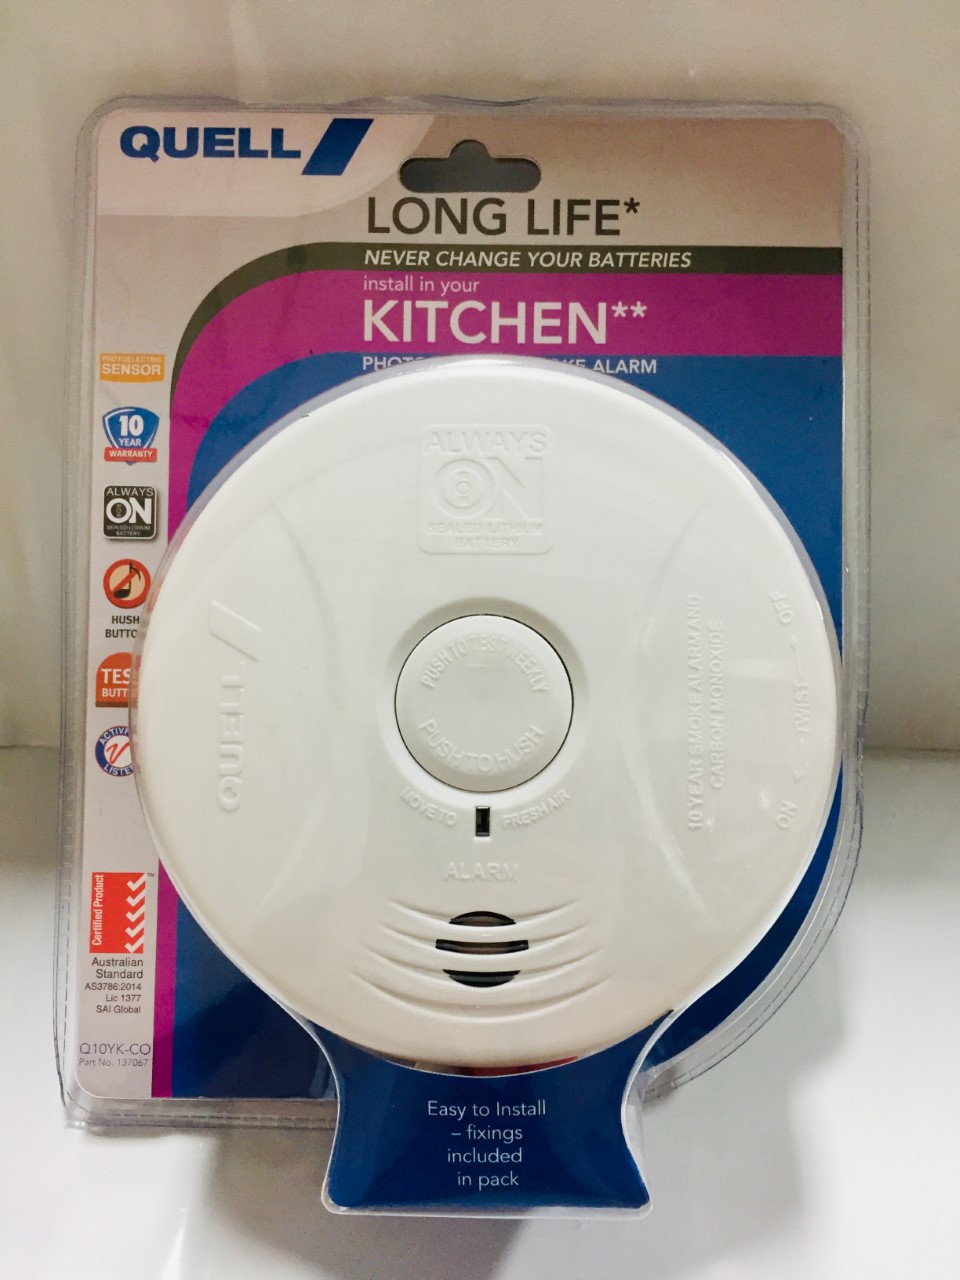 QUELL Q10YKCO LONG LIFE KITCHEN SMOKE ALARM AND CARBON